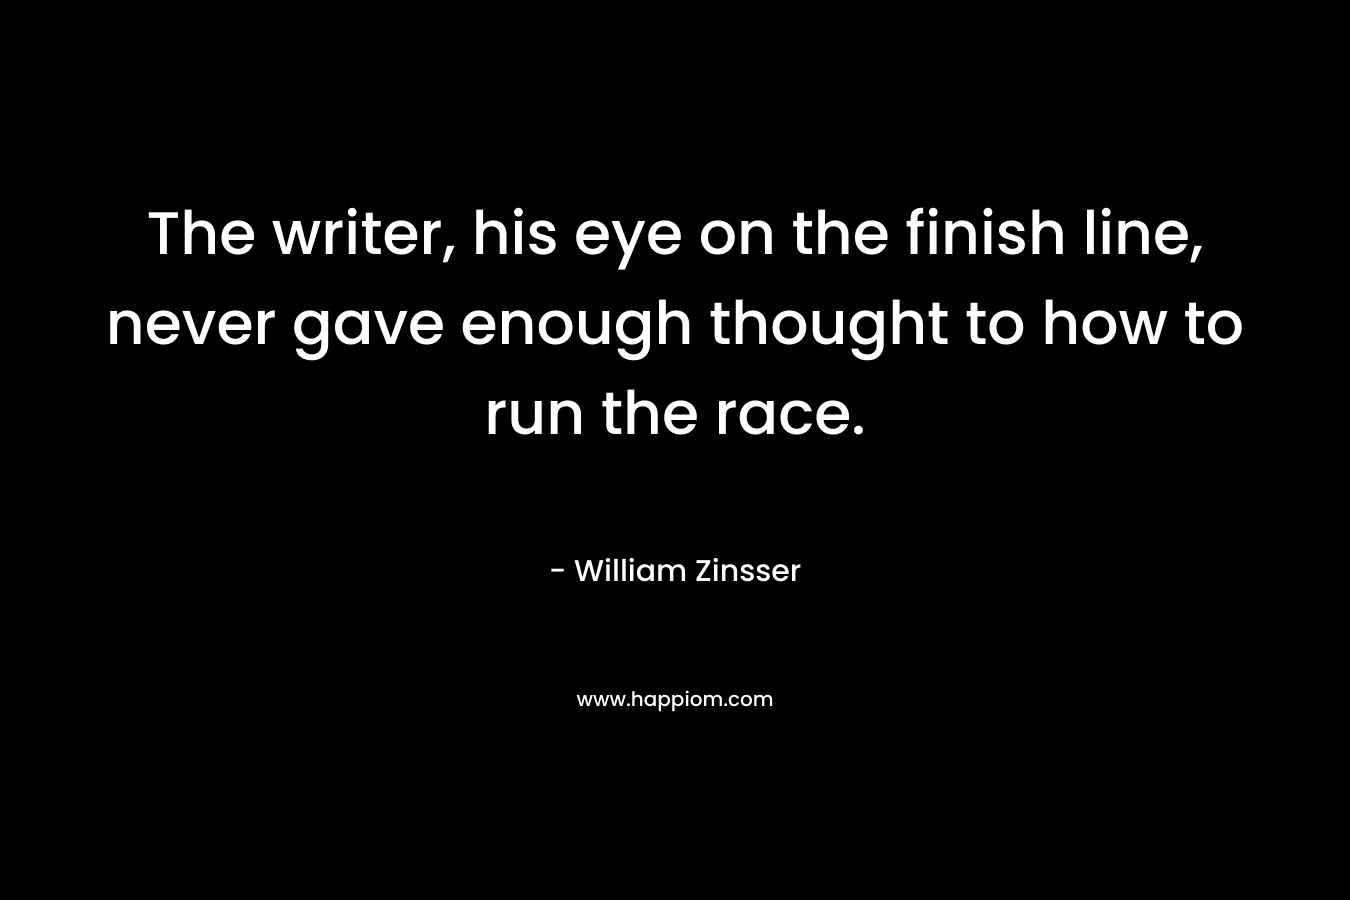 The writer, his eye on the finish line, never gave enough thought to how to run the race.